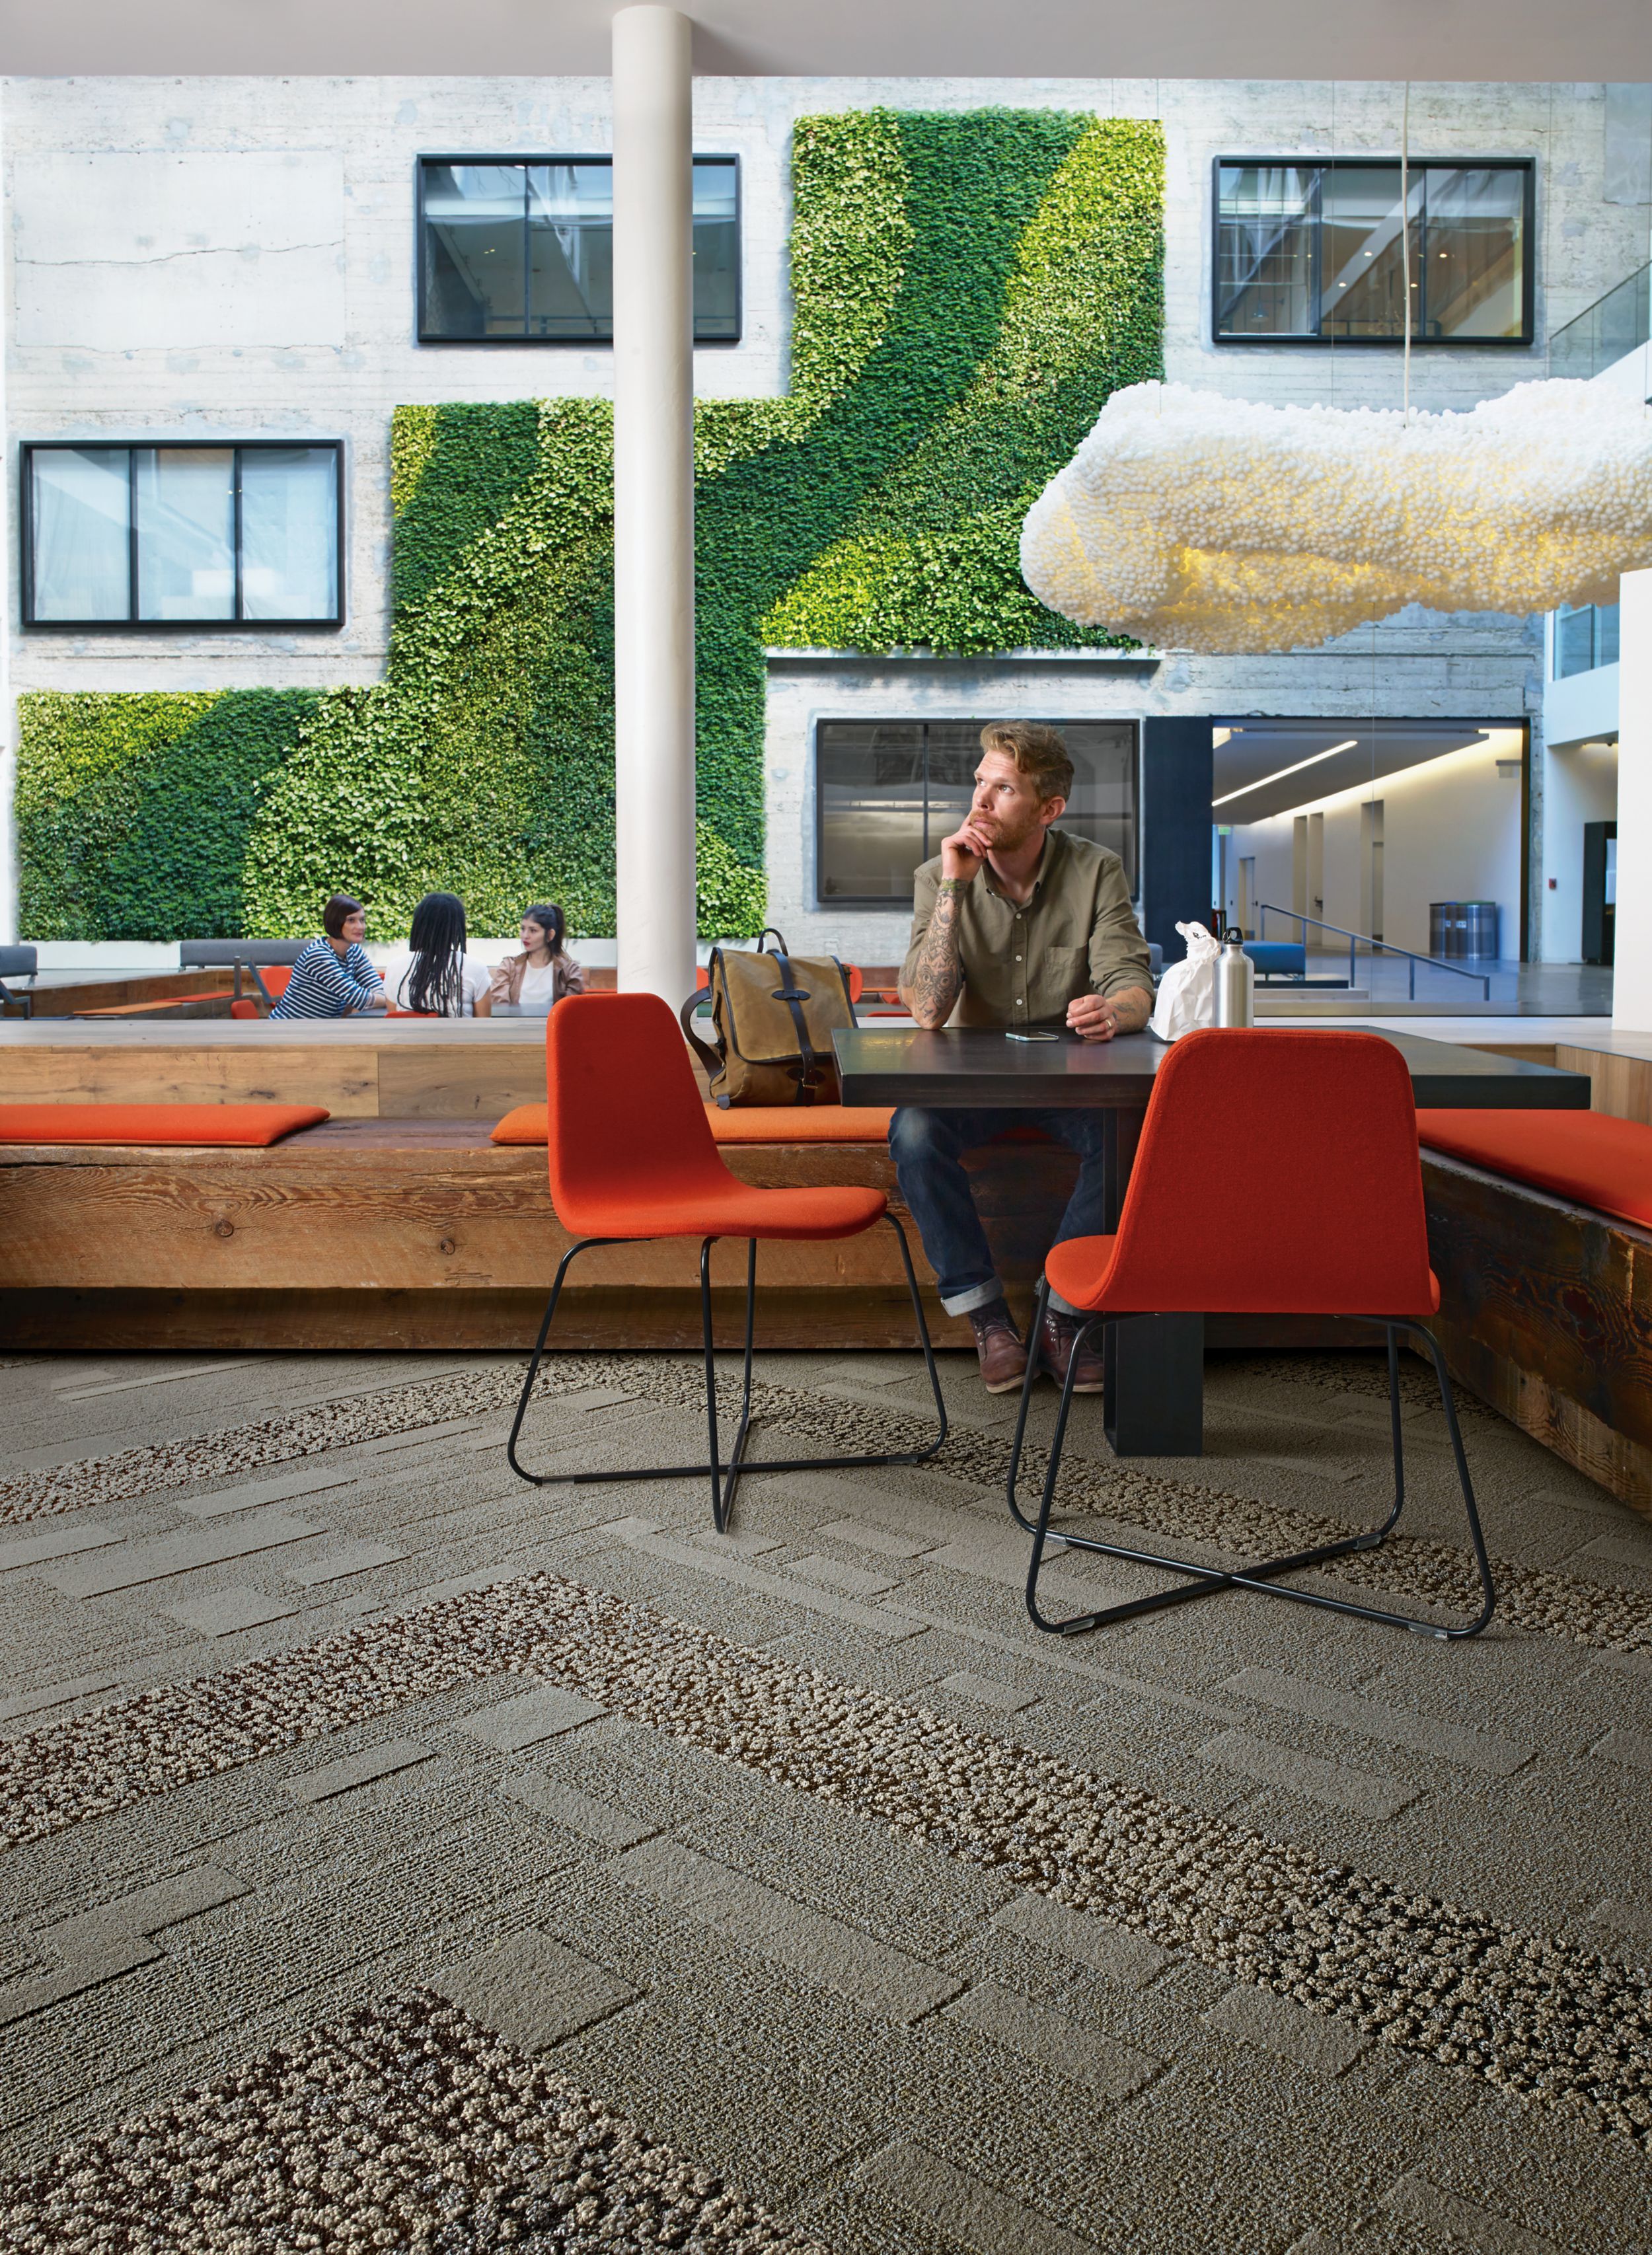 Interface EM552 plank carpet tile with man sitting at table with lunch and group meeting in front of vine wall in the background  Bildnummer 7